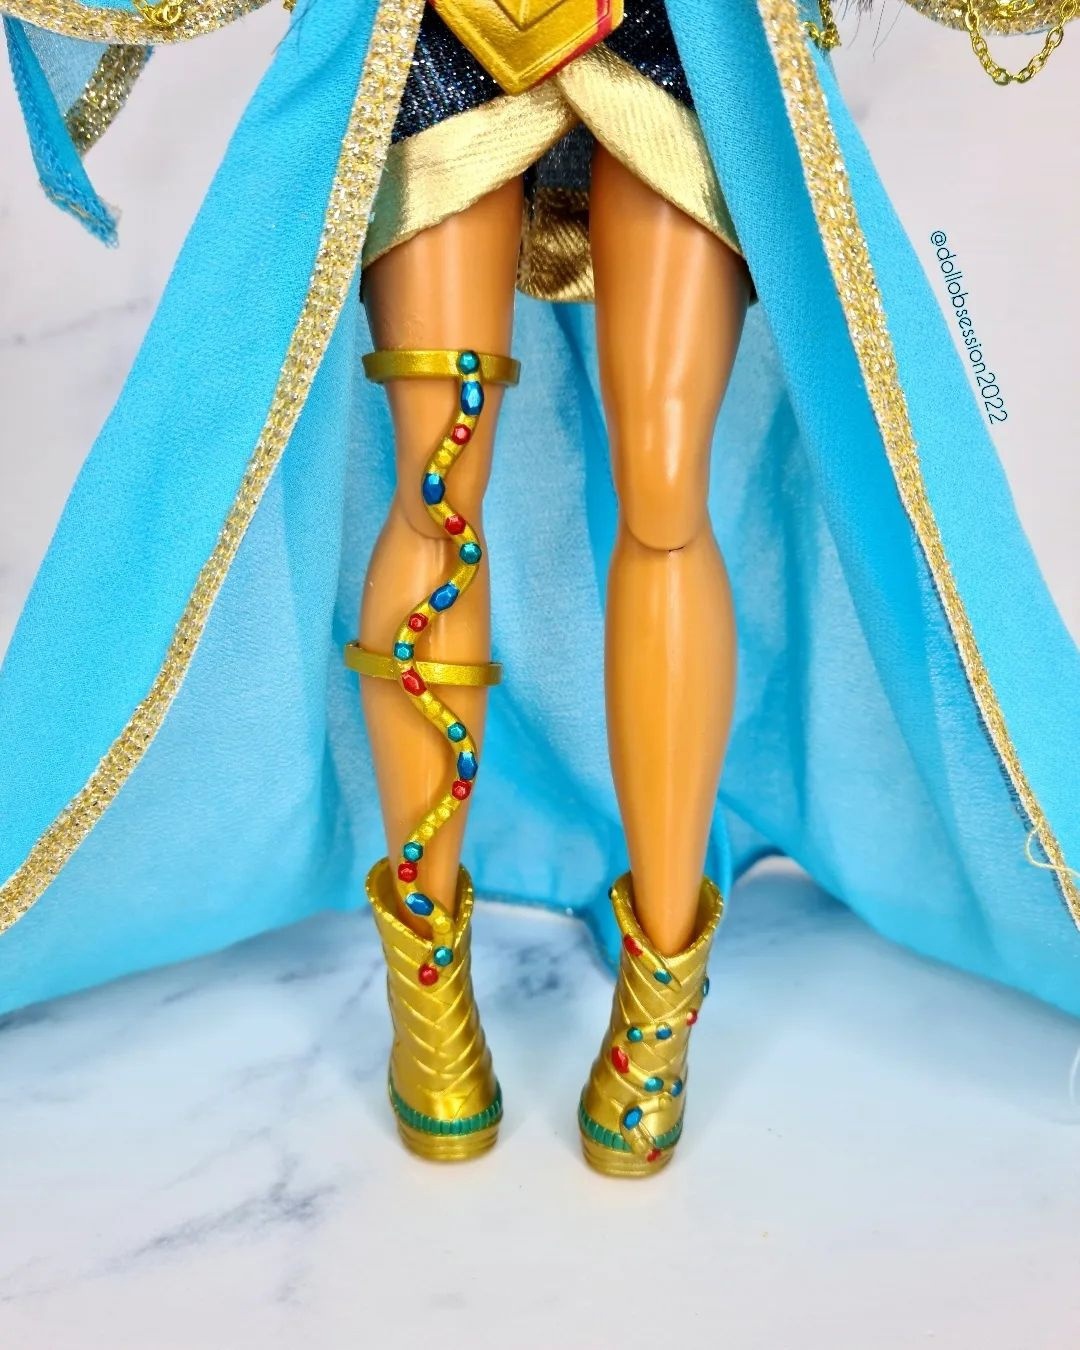 LOL Surprise OMG Fierce Limited Edition Premium Collector Cleopatra Doll